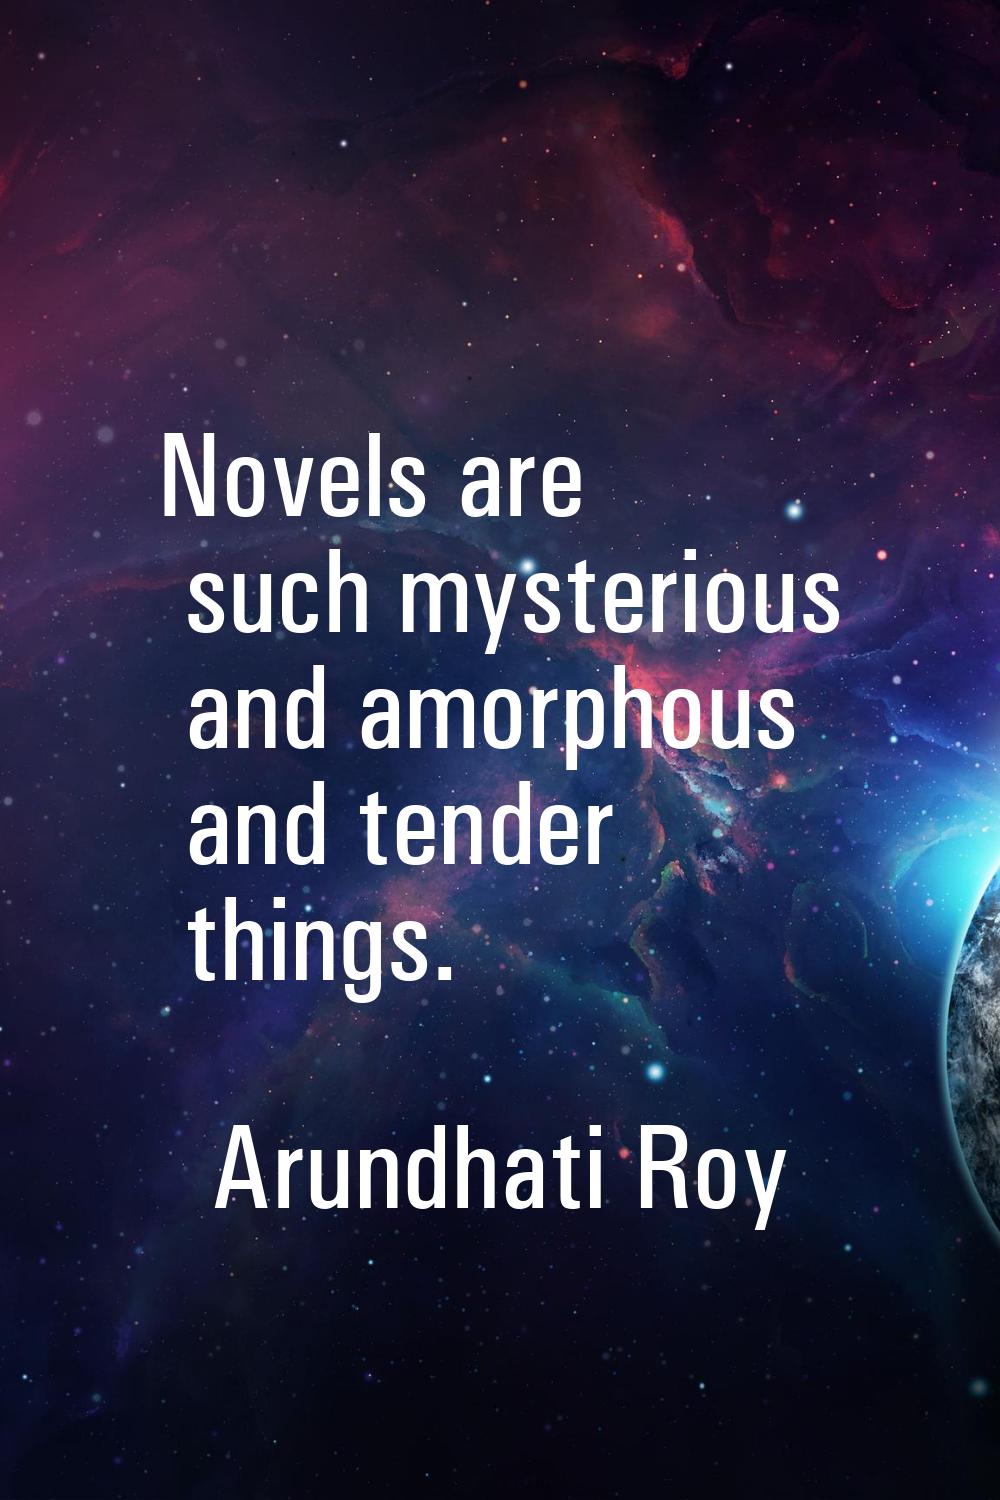 Novels are such mysterious and amorphous and tender things.